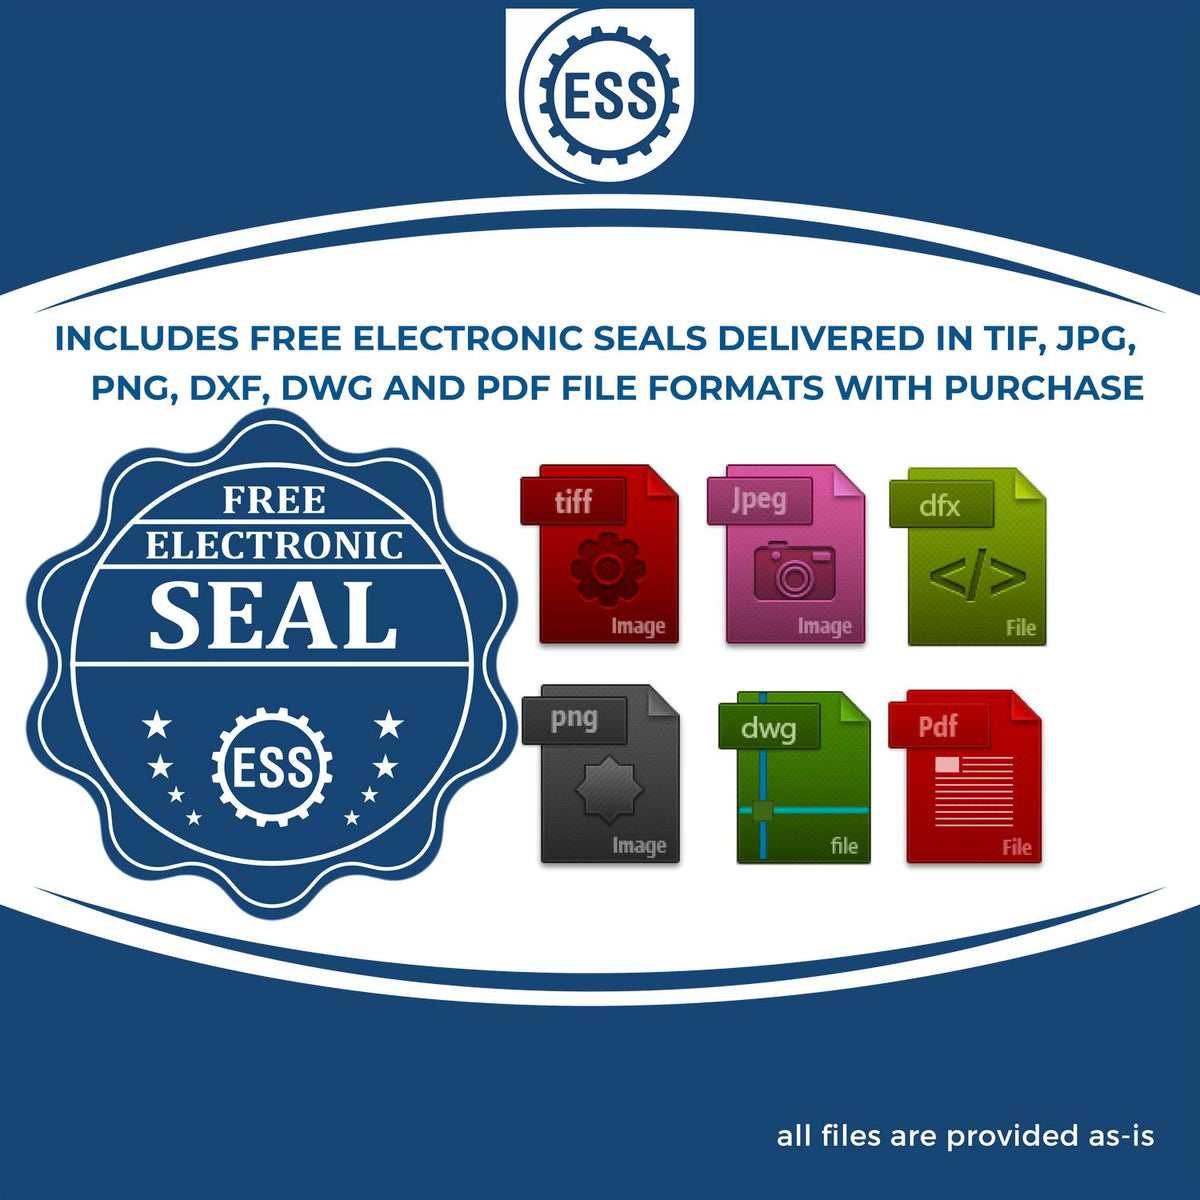 An infographic for the free electronic seal for the State of West Virginia Long Reach Architectural Embossing Seal illustrating the different file type icons such as DXF, DWG, TIF, JPG and PNG.